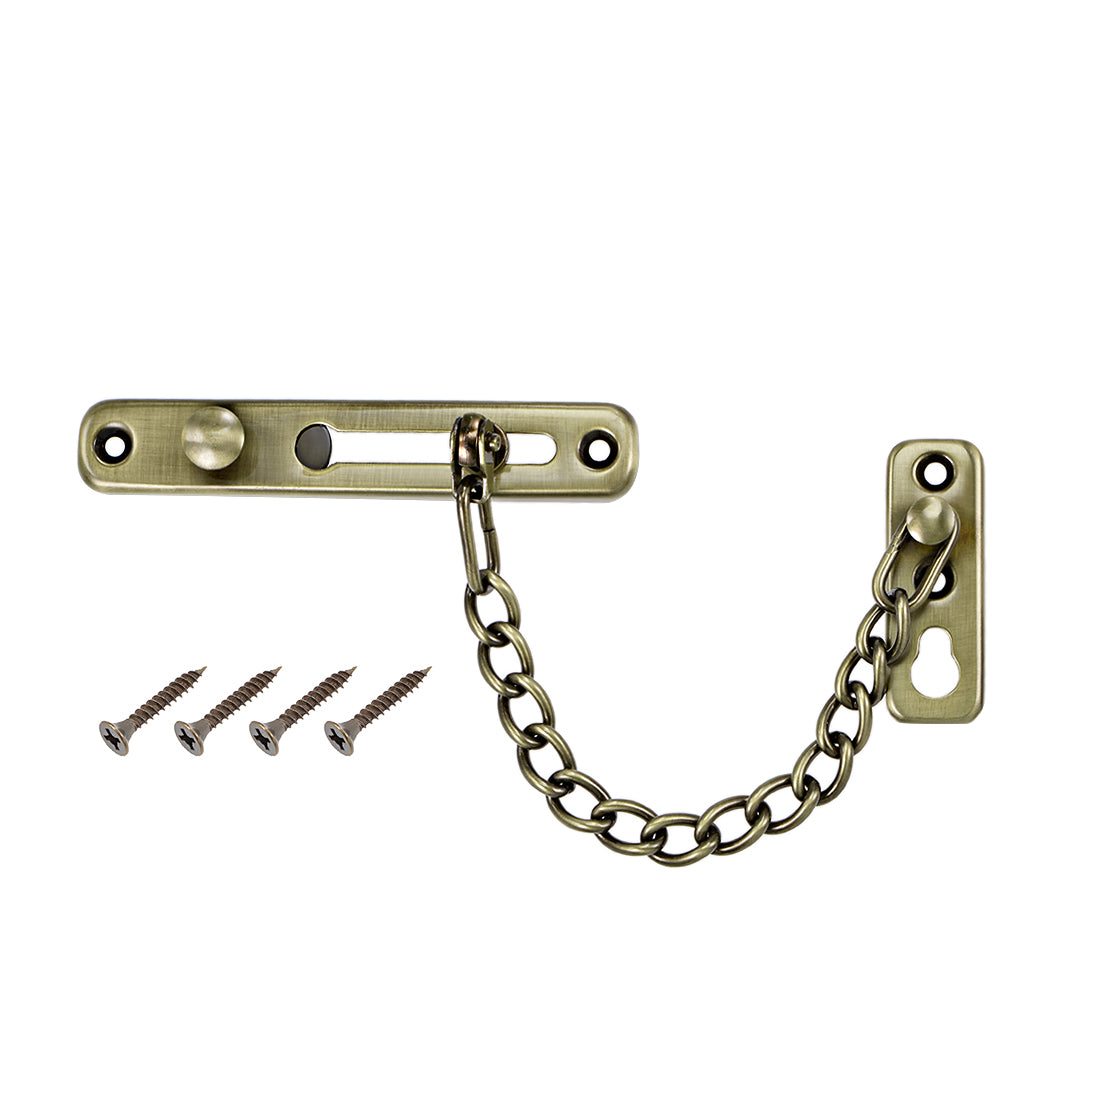 uxcell Uxcell Chain Door Guard Lock Security Safety Latch Lock with Spring Anti-Theft Press Lock Bronze